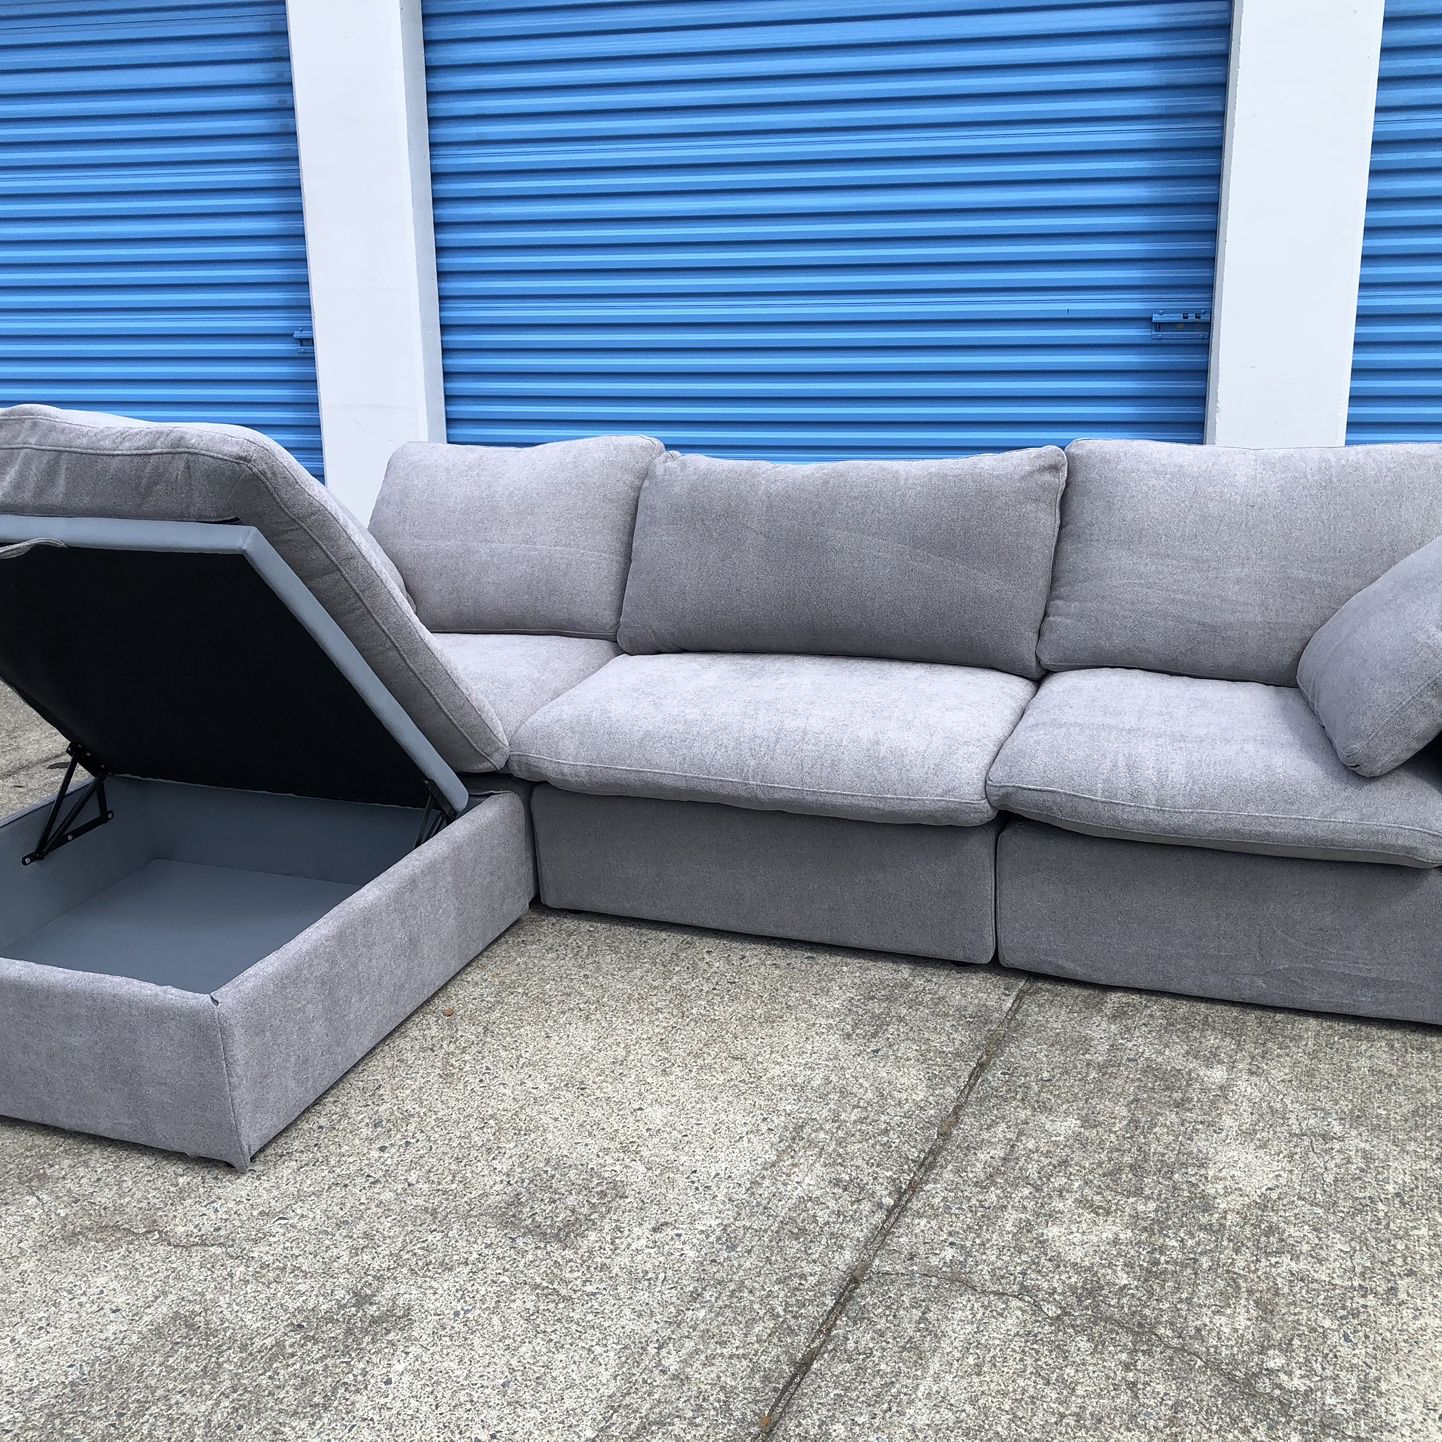 FREE DELIVERY- Brand New Grey Cloud Modular Sectional Couch